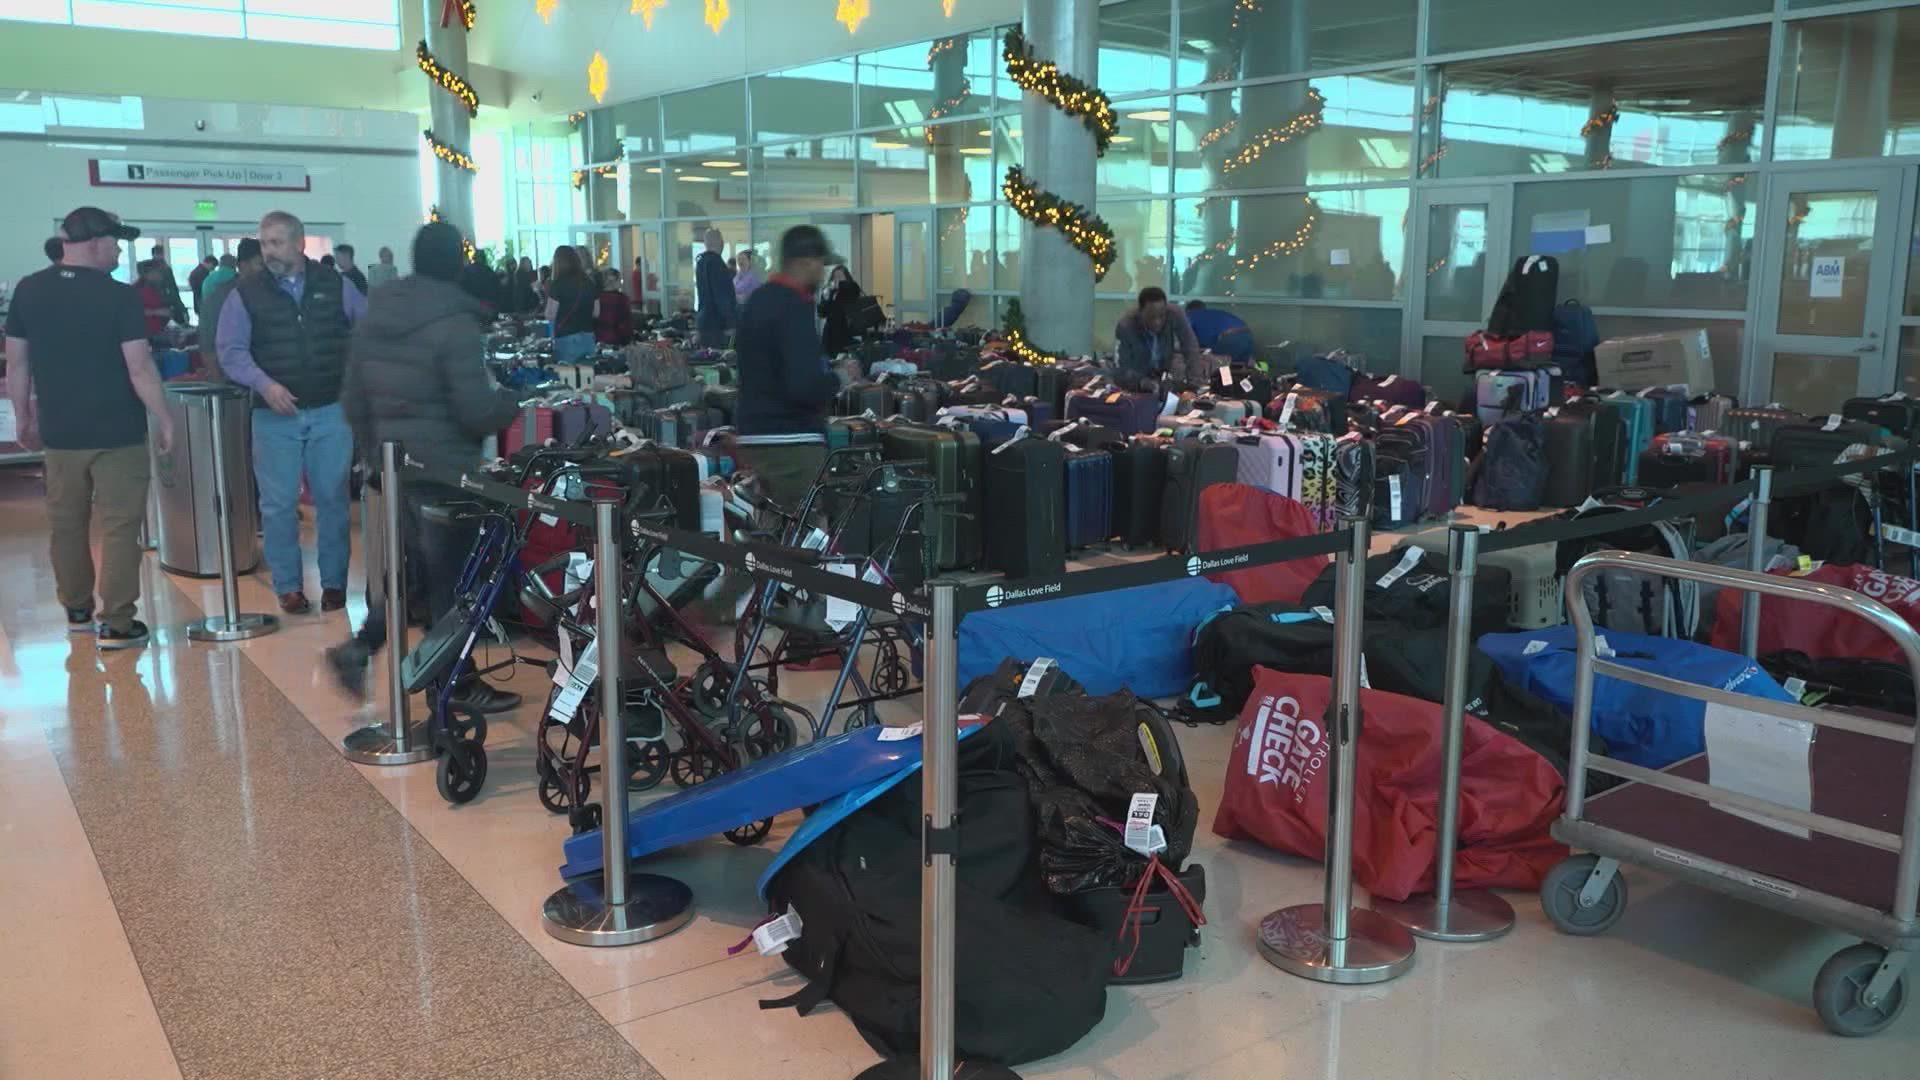 Dallas Love Field has organized bags and added a new online tool to get them back to people, and FedEx crews also picked up several carts of luggage.